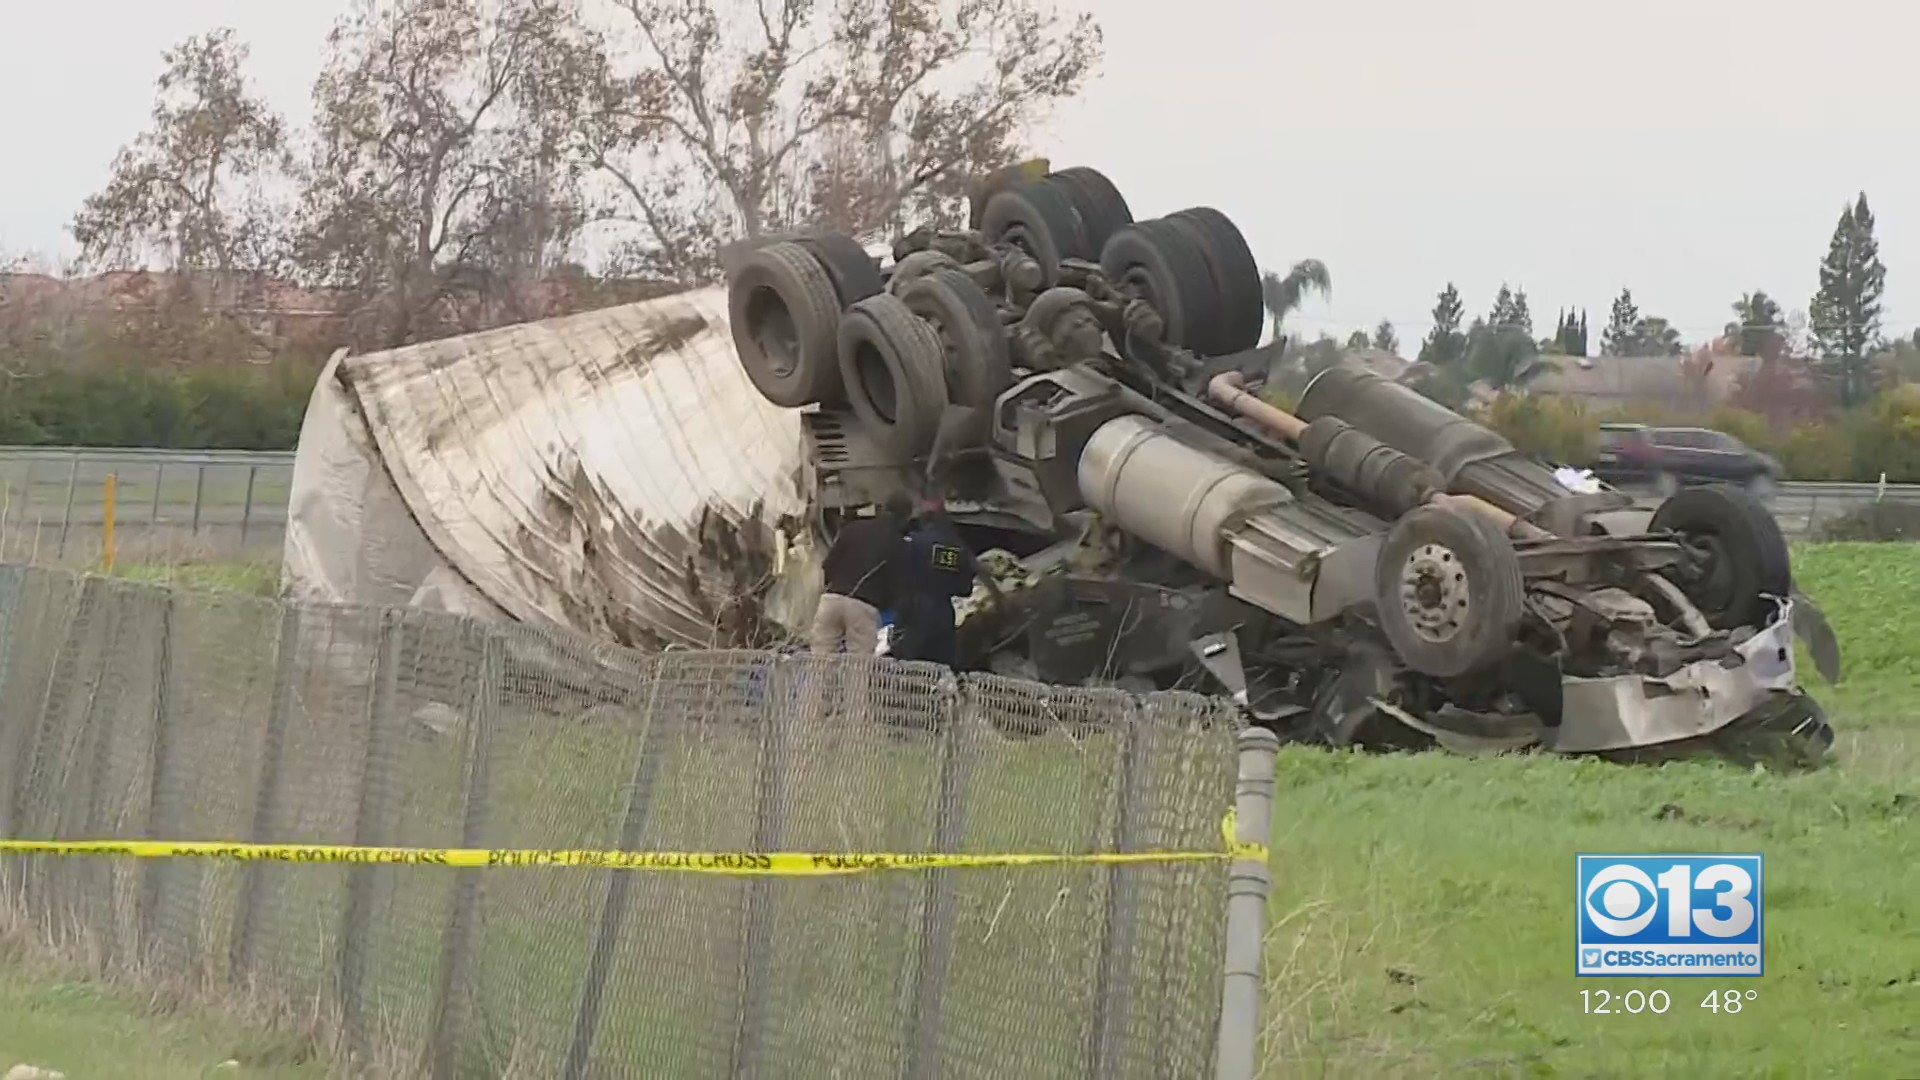 Driver Of Big Rig Dies After Crashing On Del Paso Road Near I-5, Identified As 35-Year-Old From Sacramento